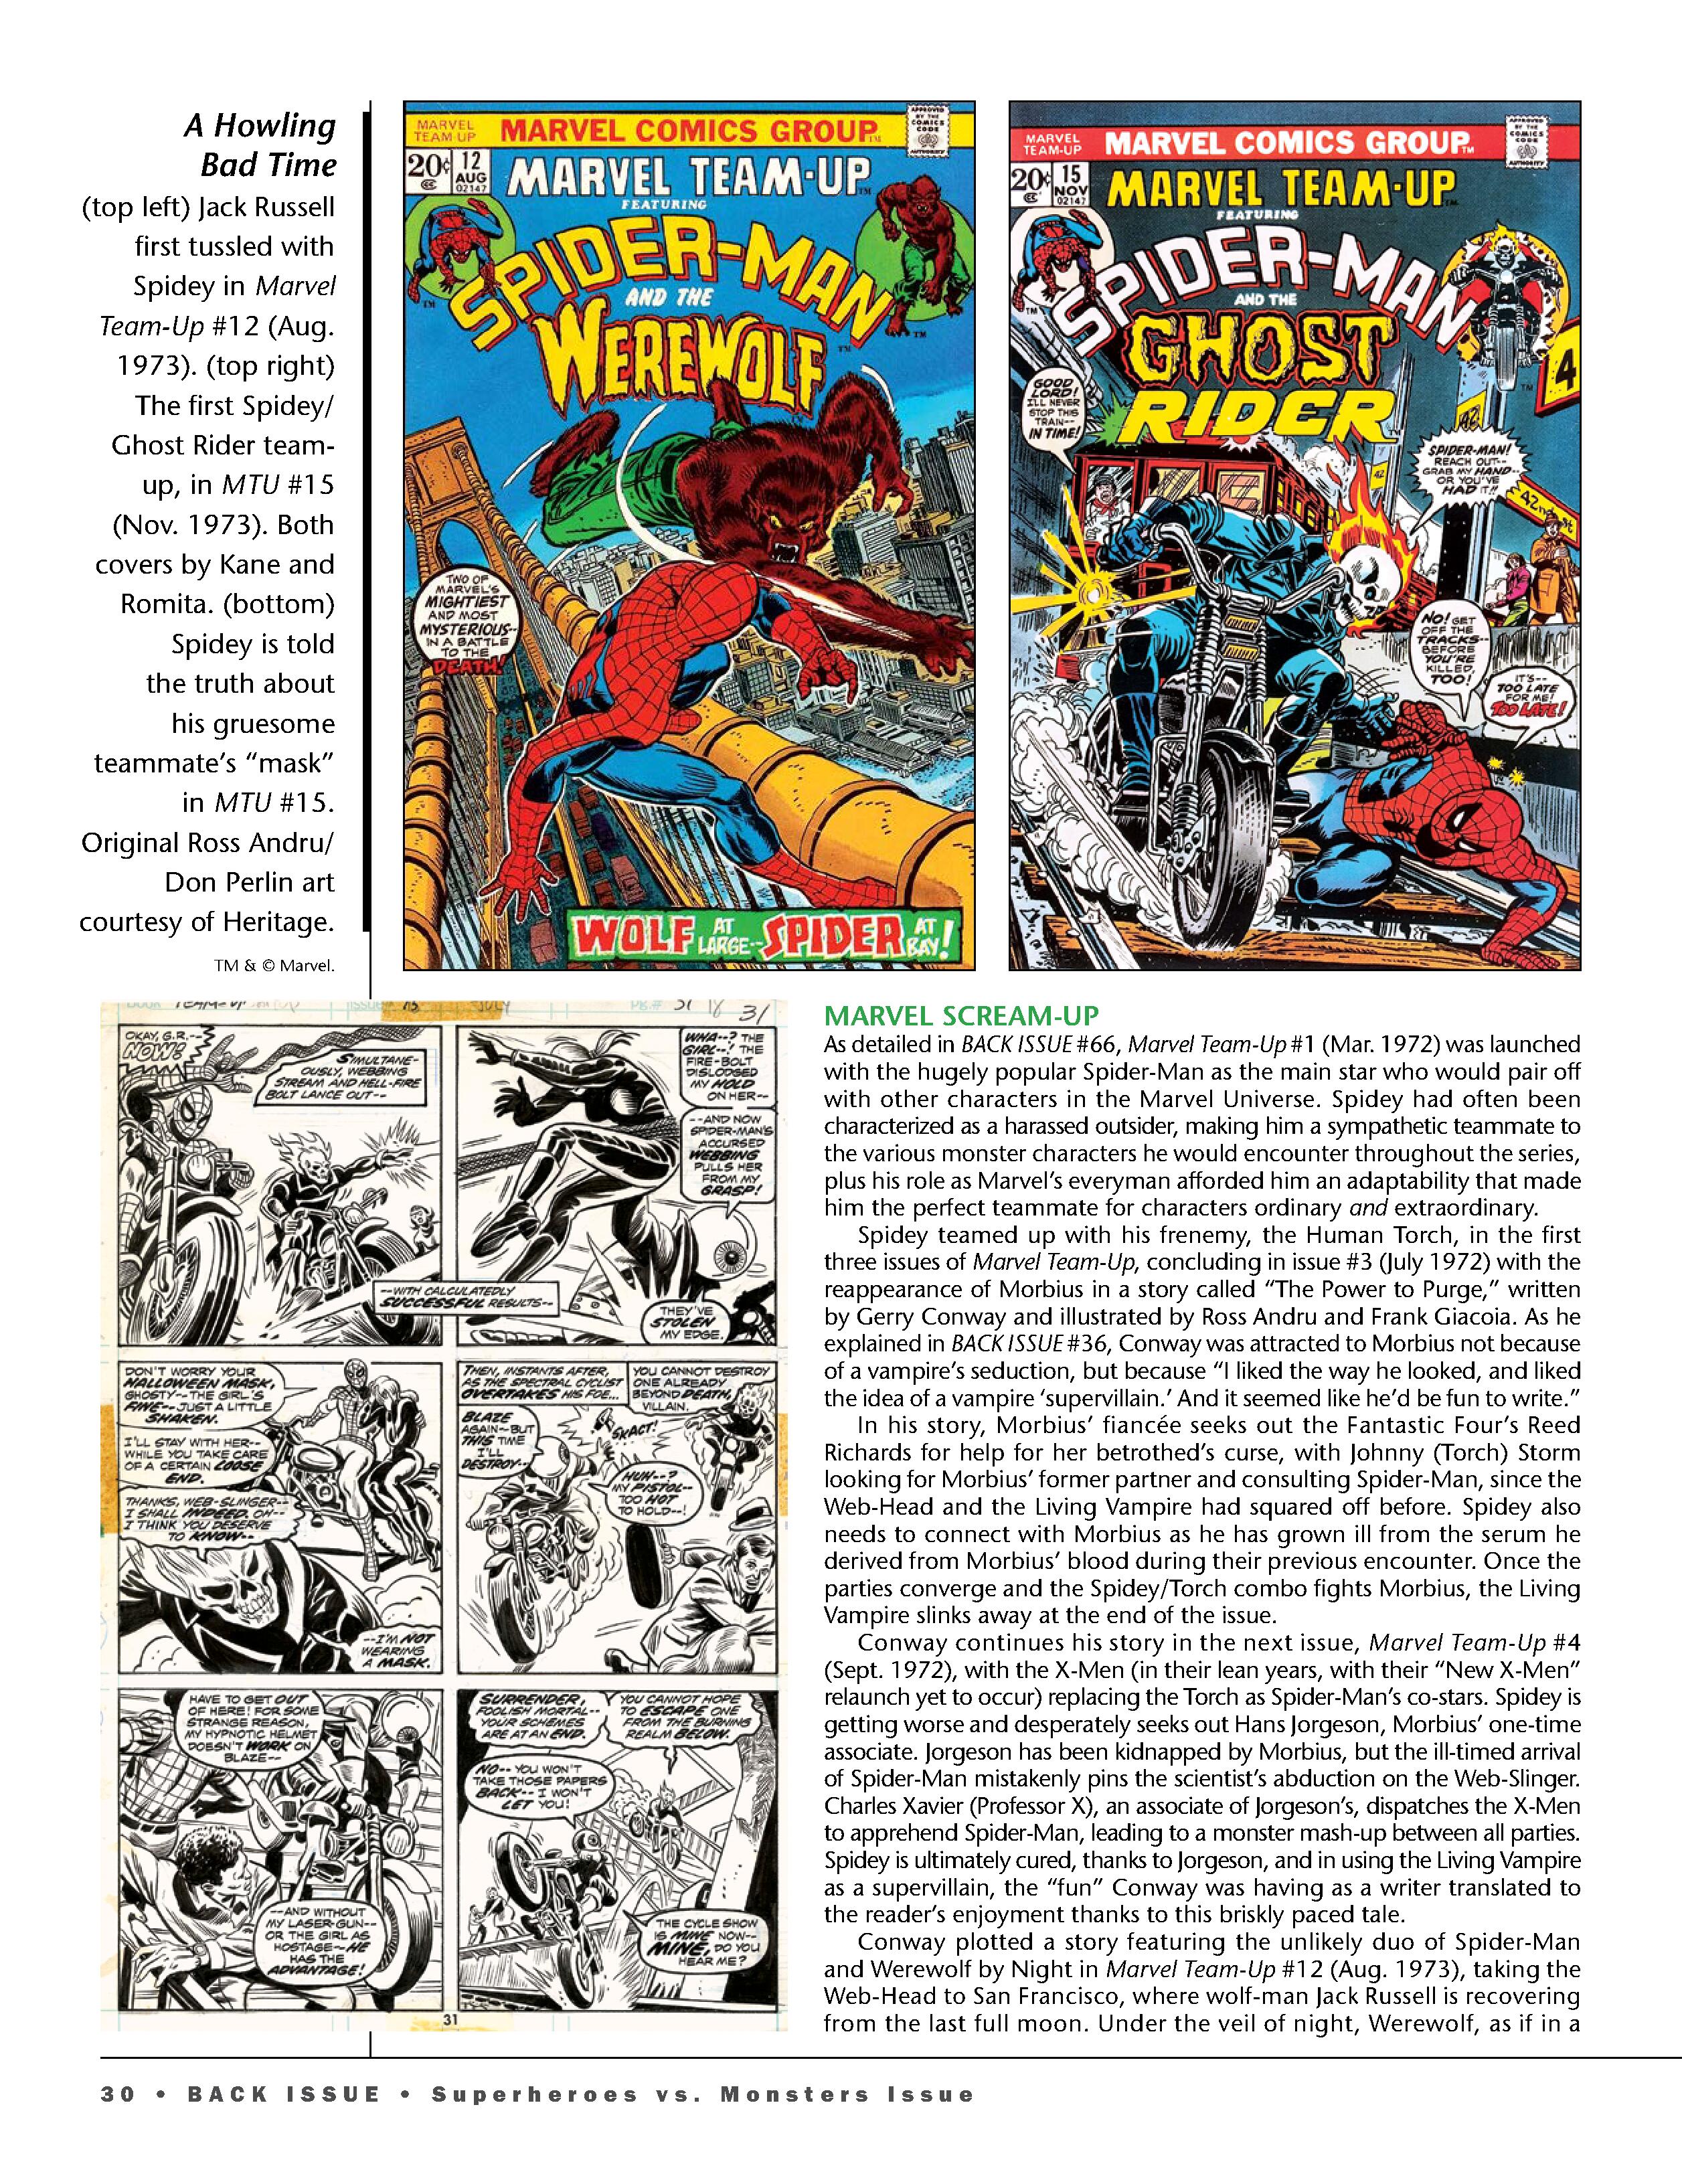 Read online Back Issue comic -  Issue #116 - 32